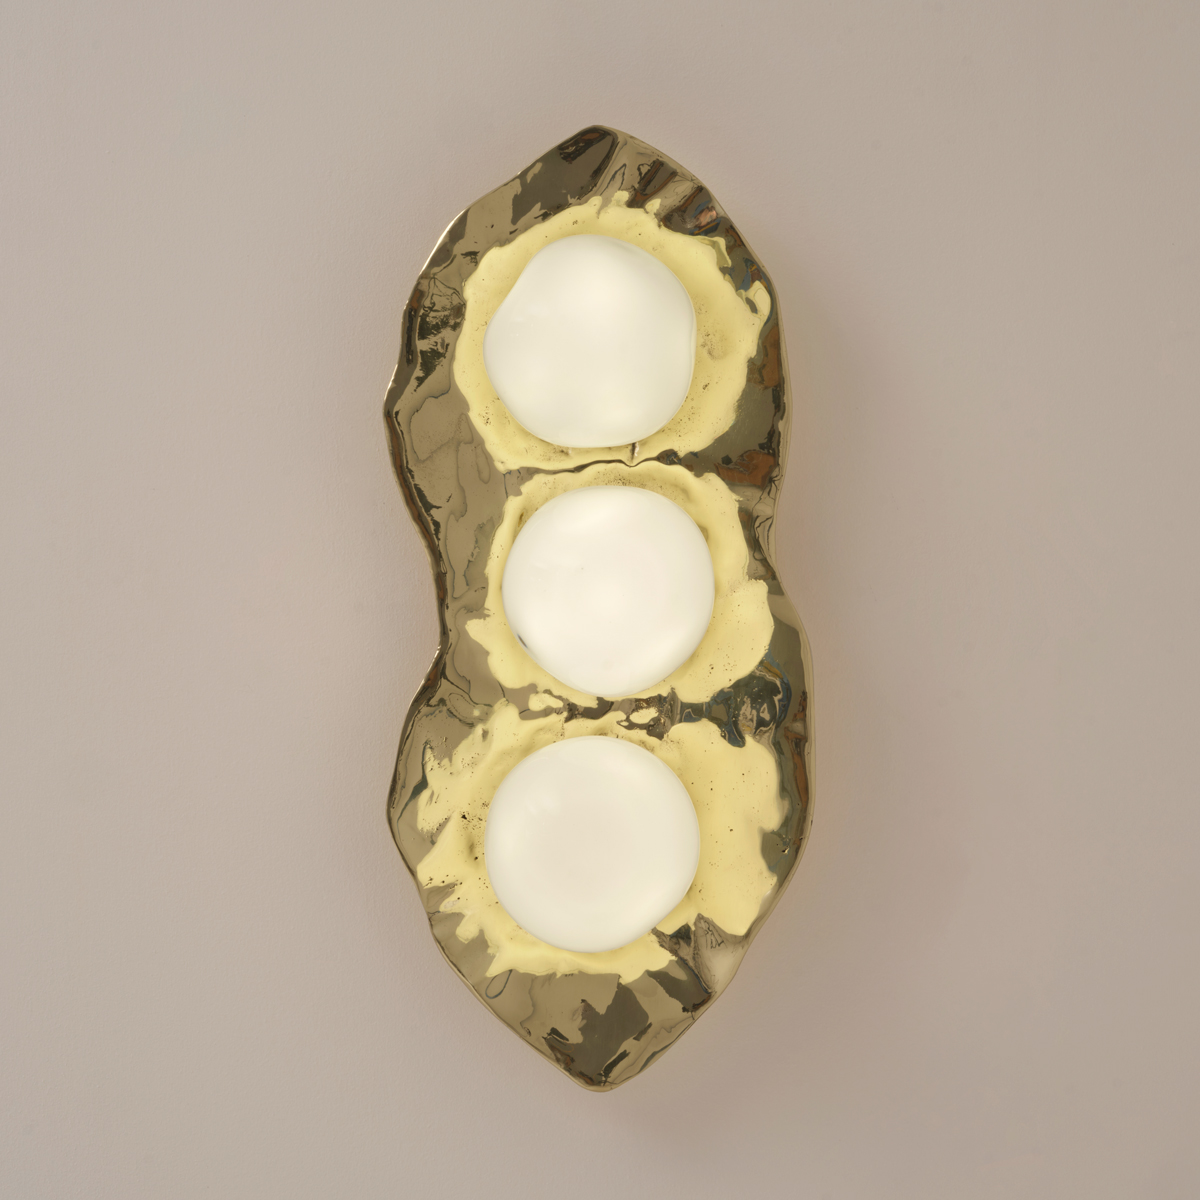 Shell Wall light by Gaspare Asaro